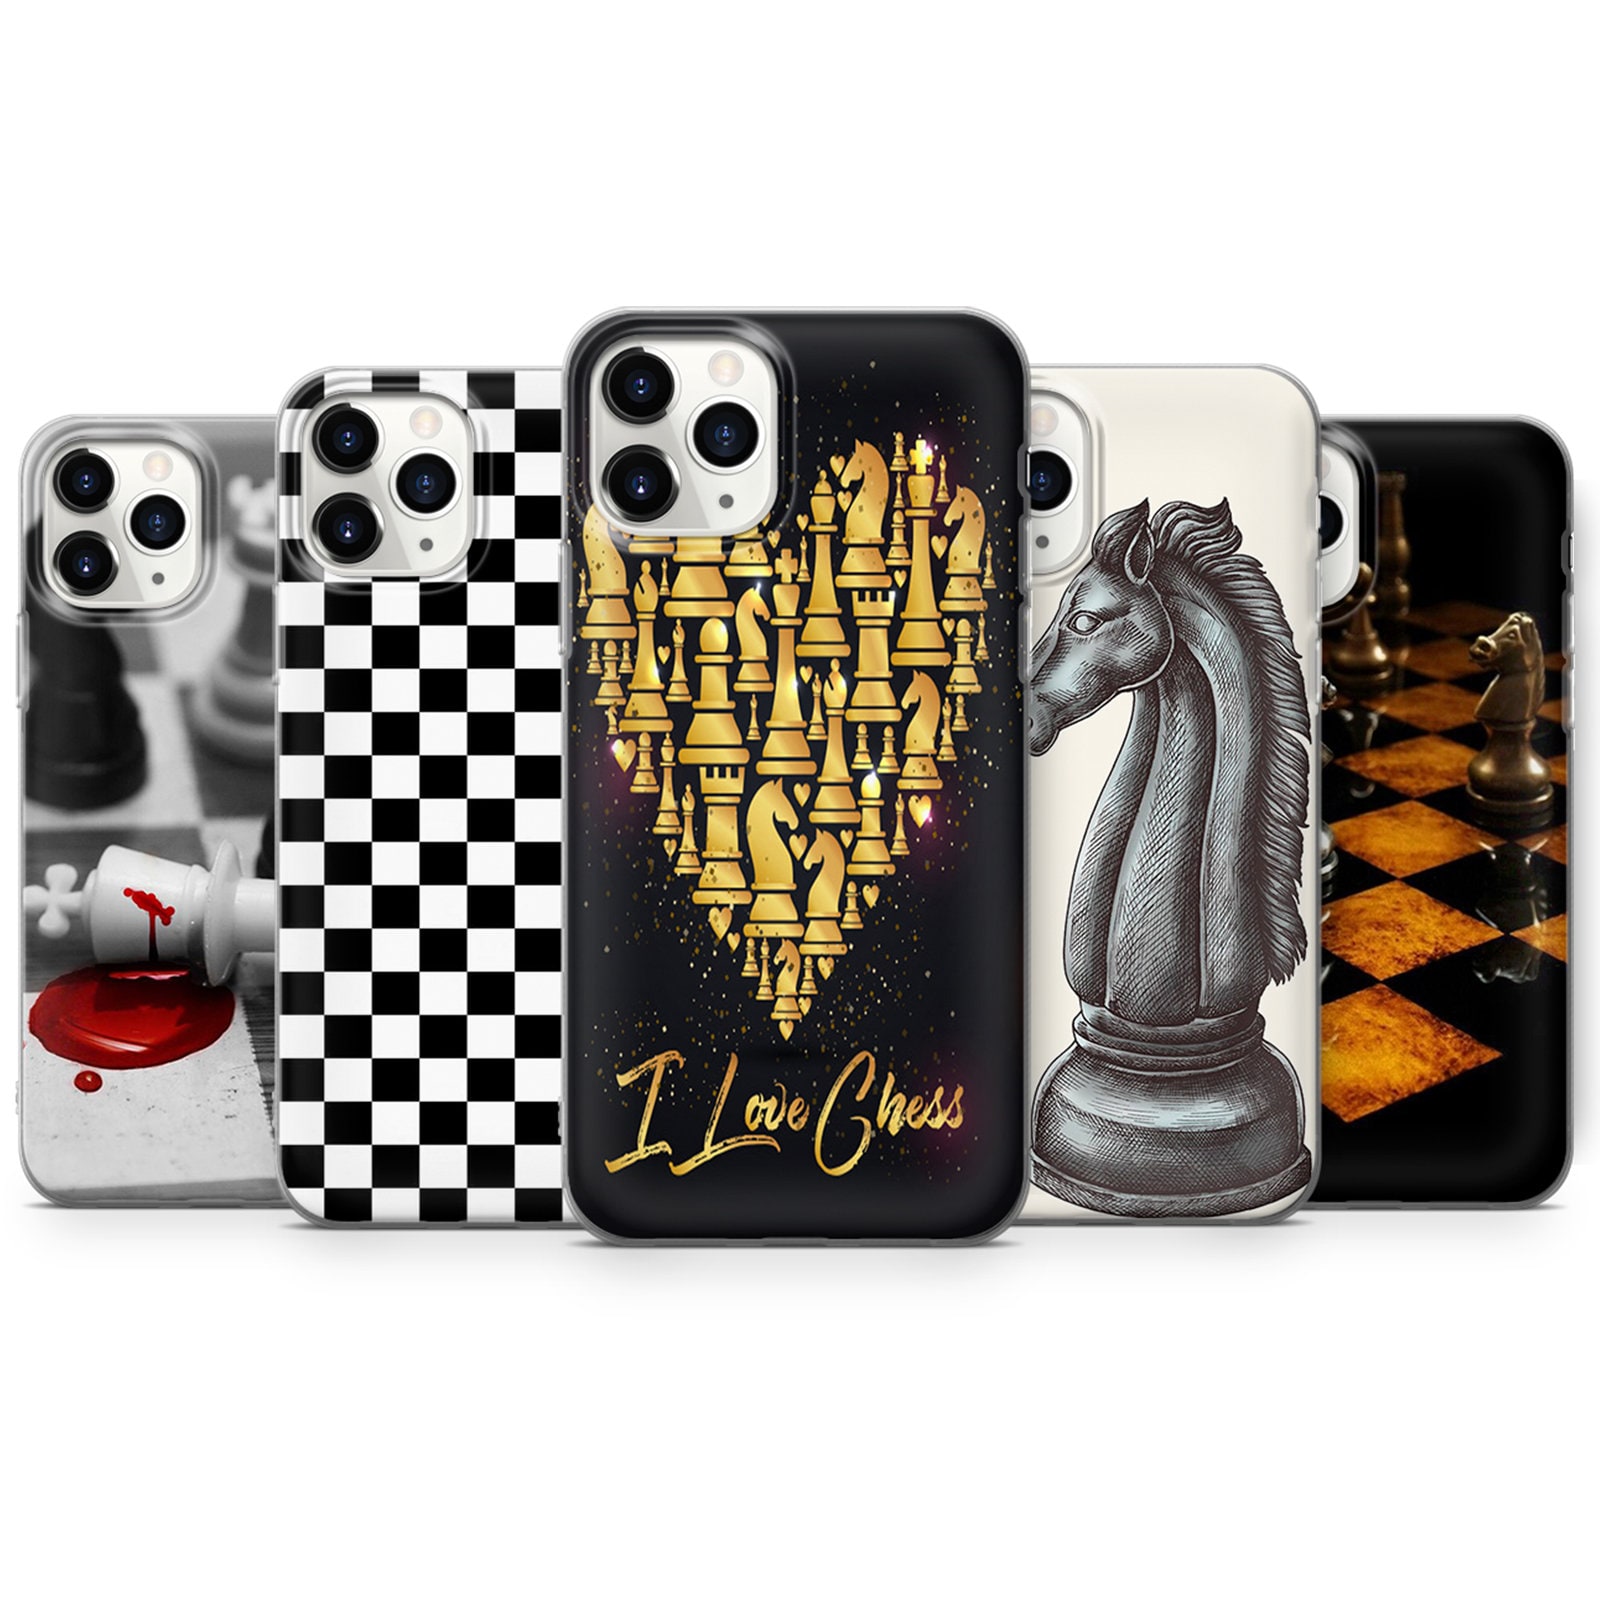 Chess King On Board iPhone 13 Case by Ktsdesign/science Photo Library -  Science Photo Gallery